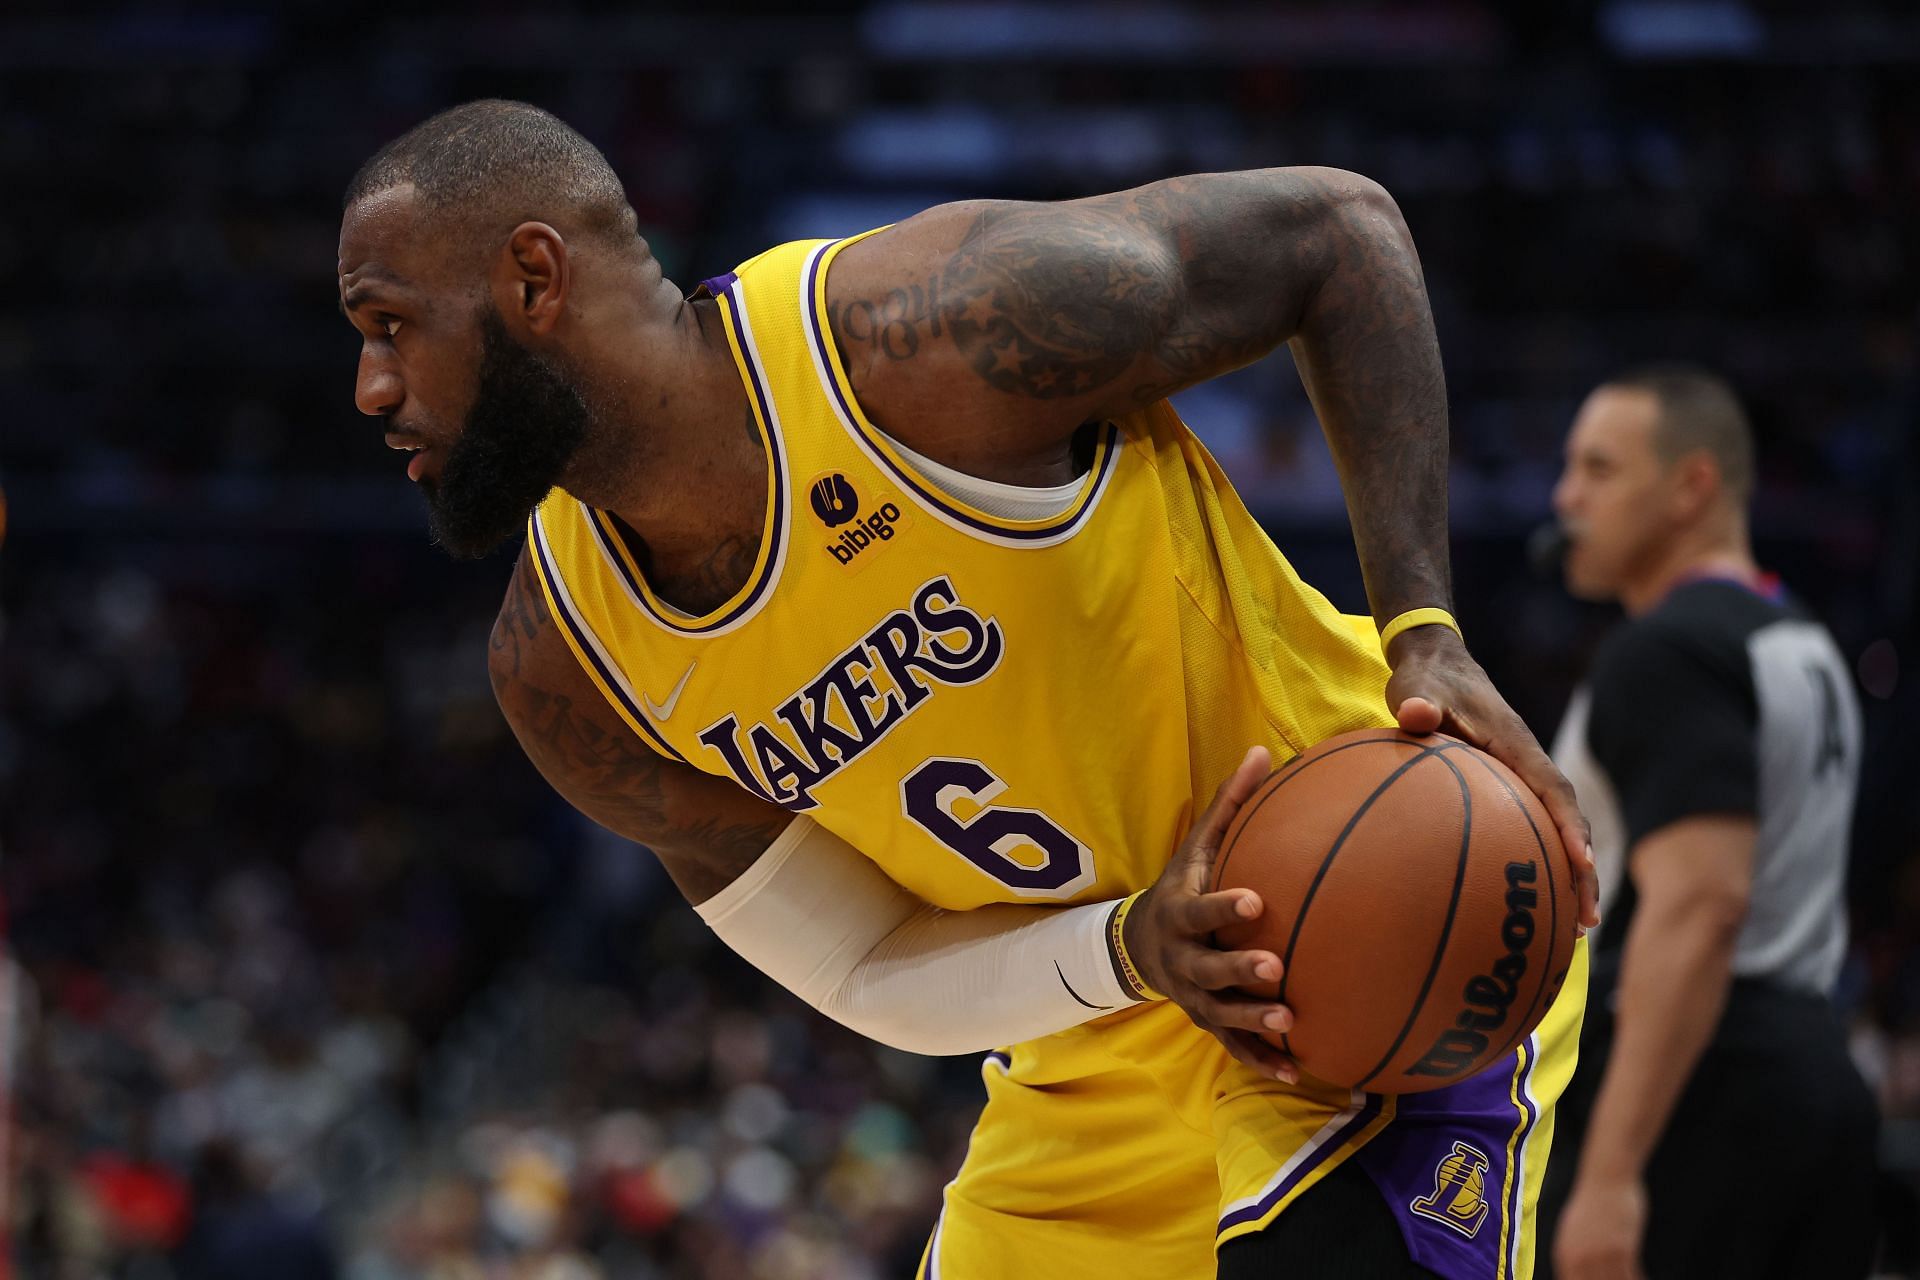 LeBron James will be looking to be back stronger for the Los Angeles Lakers next season